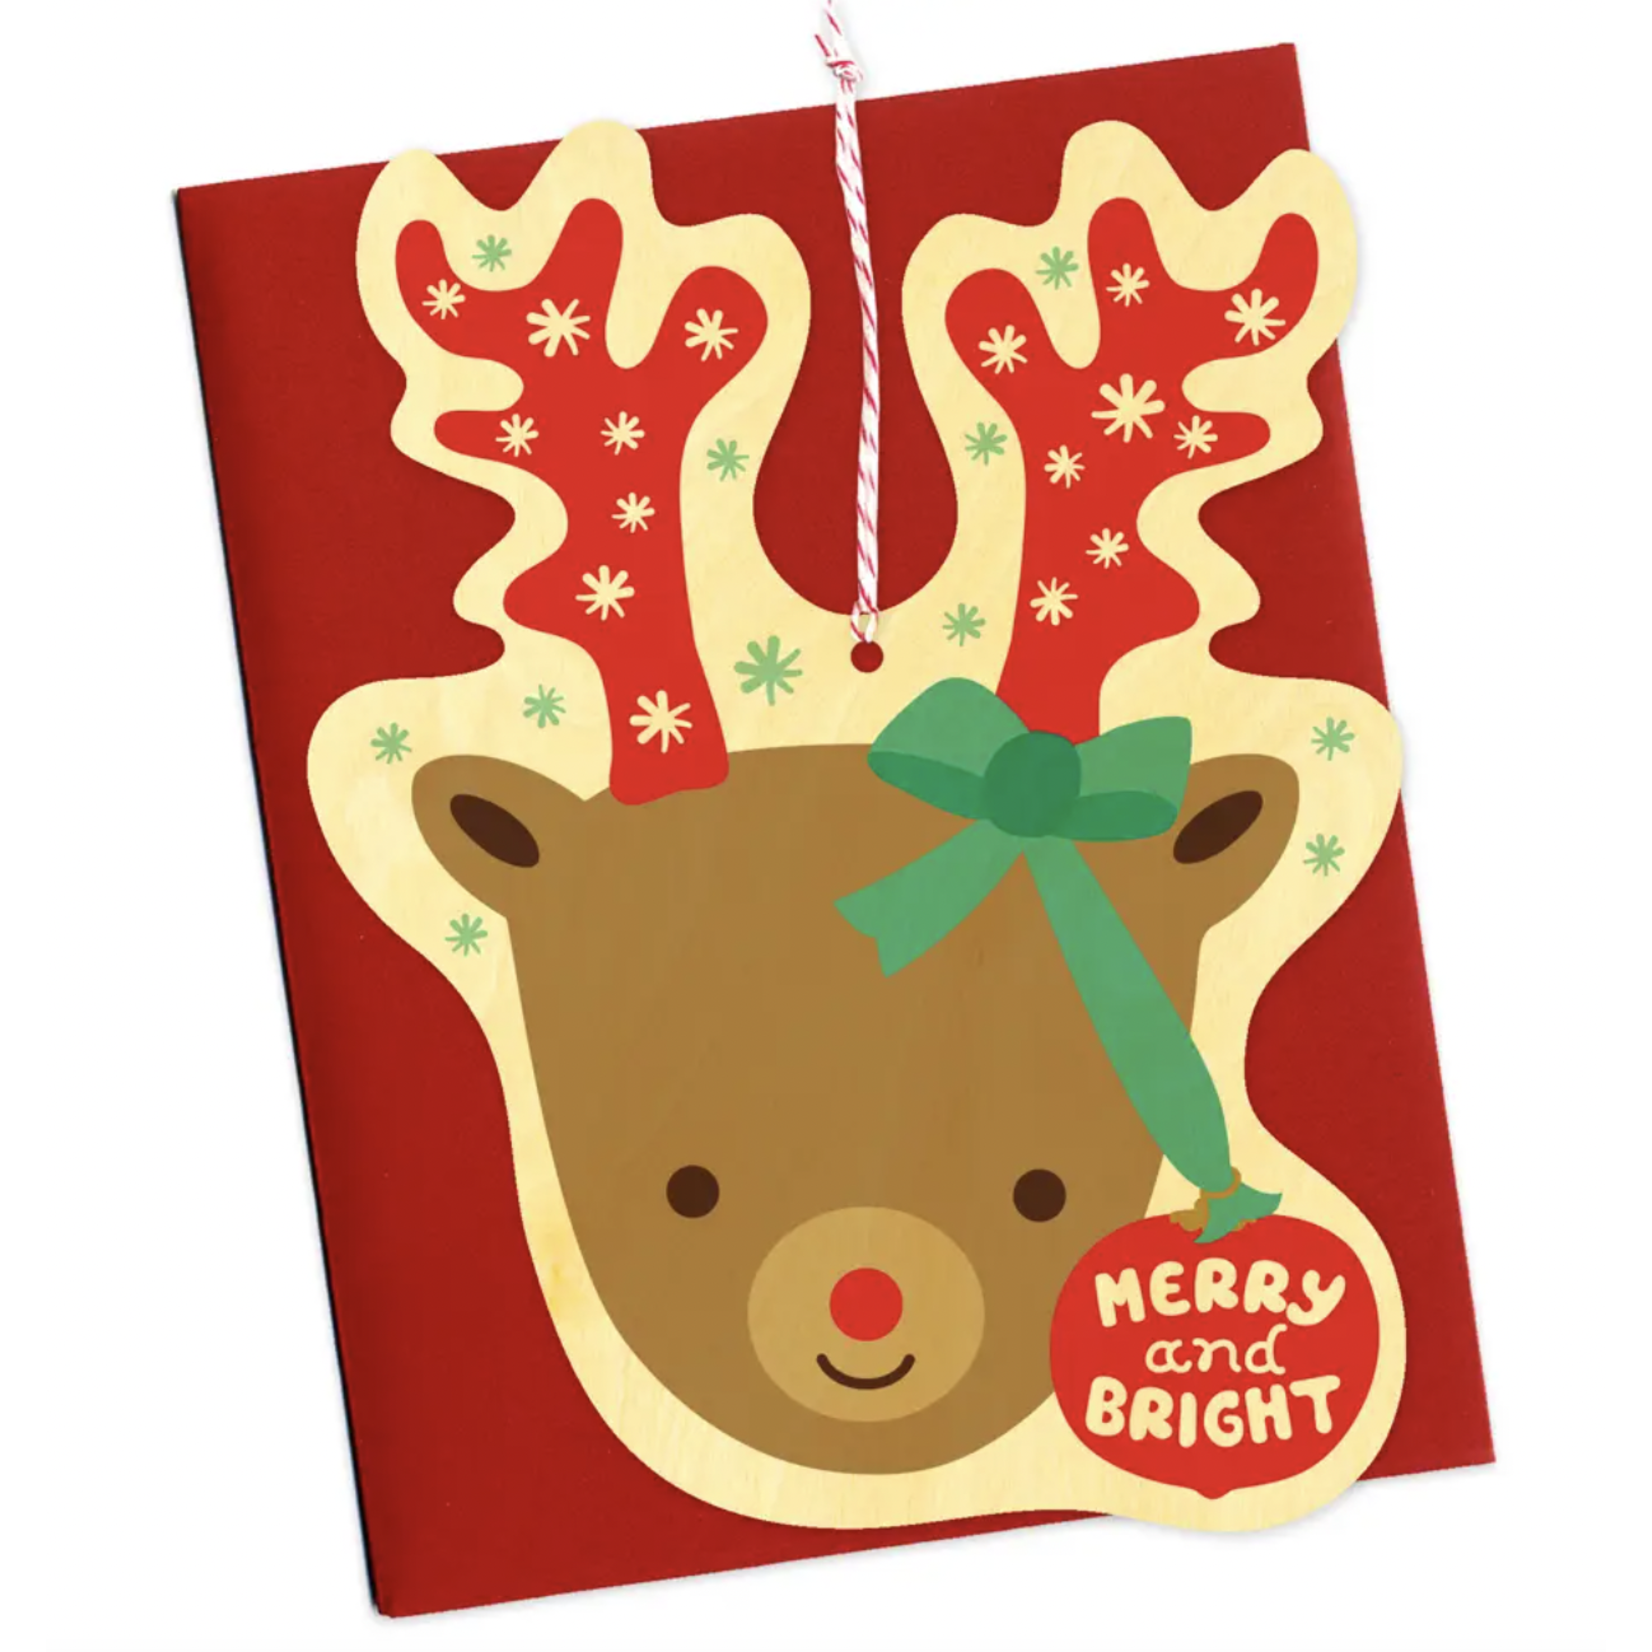 Night Owl Paper Goods Bright Reindeer Wood Ornament Holiday Card